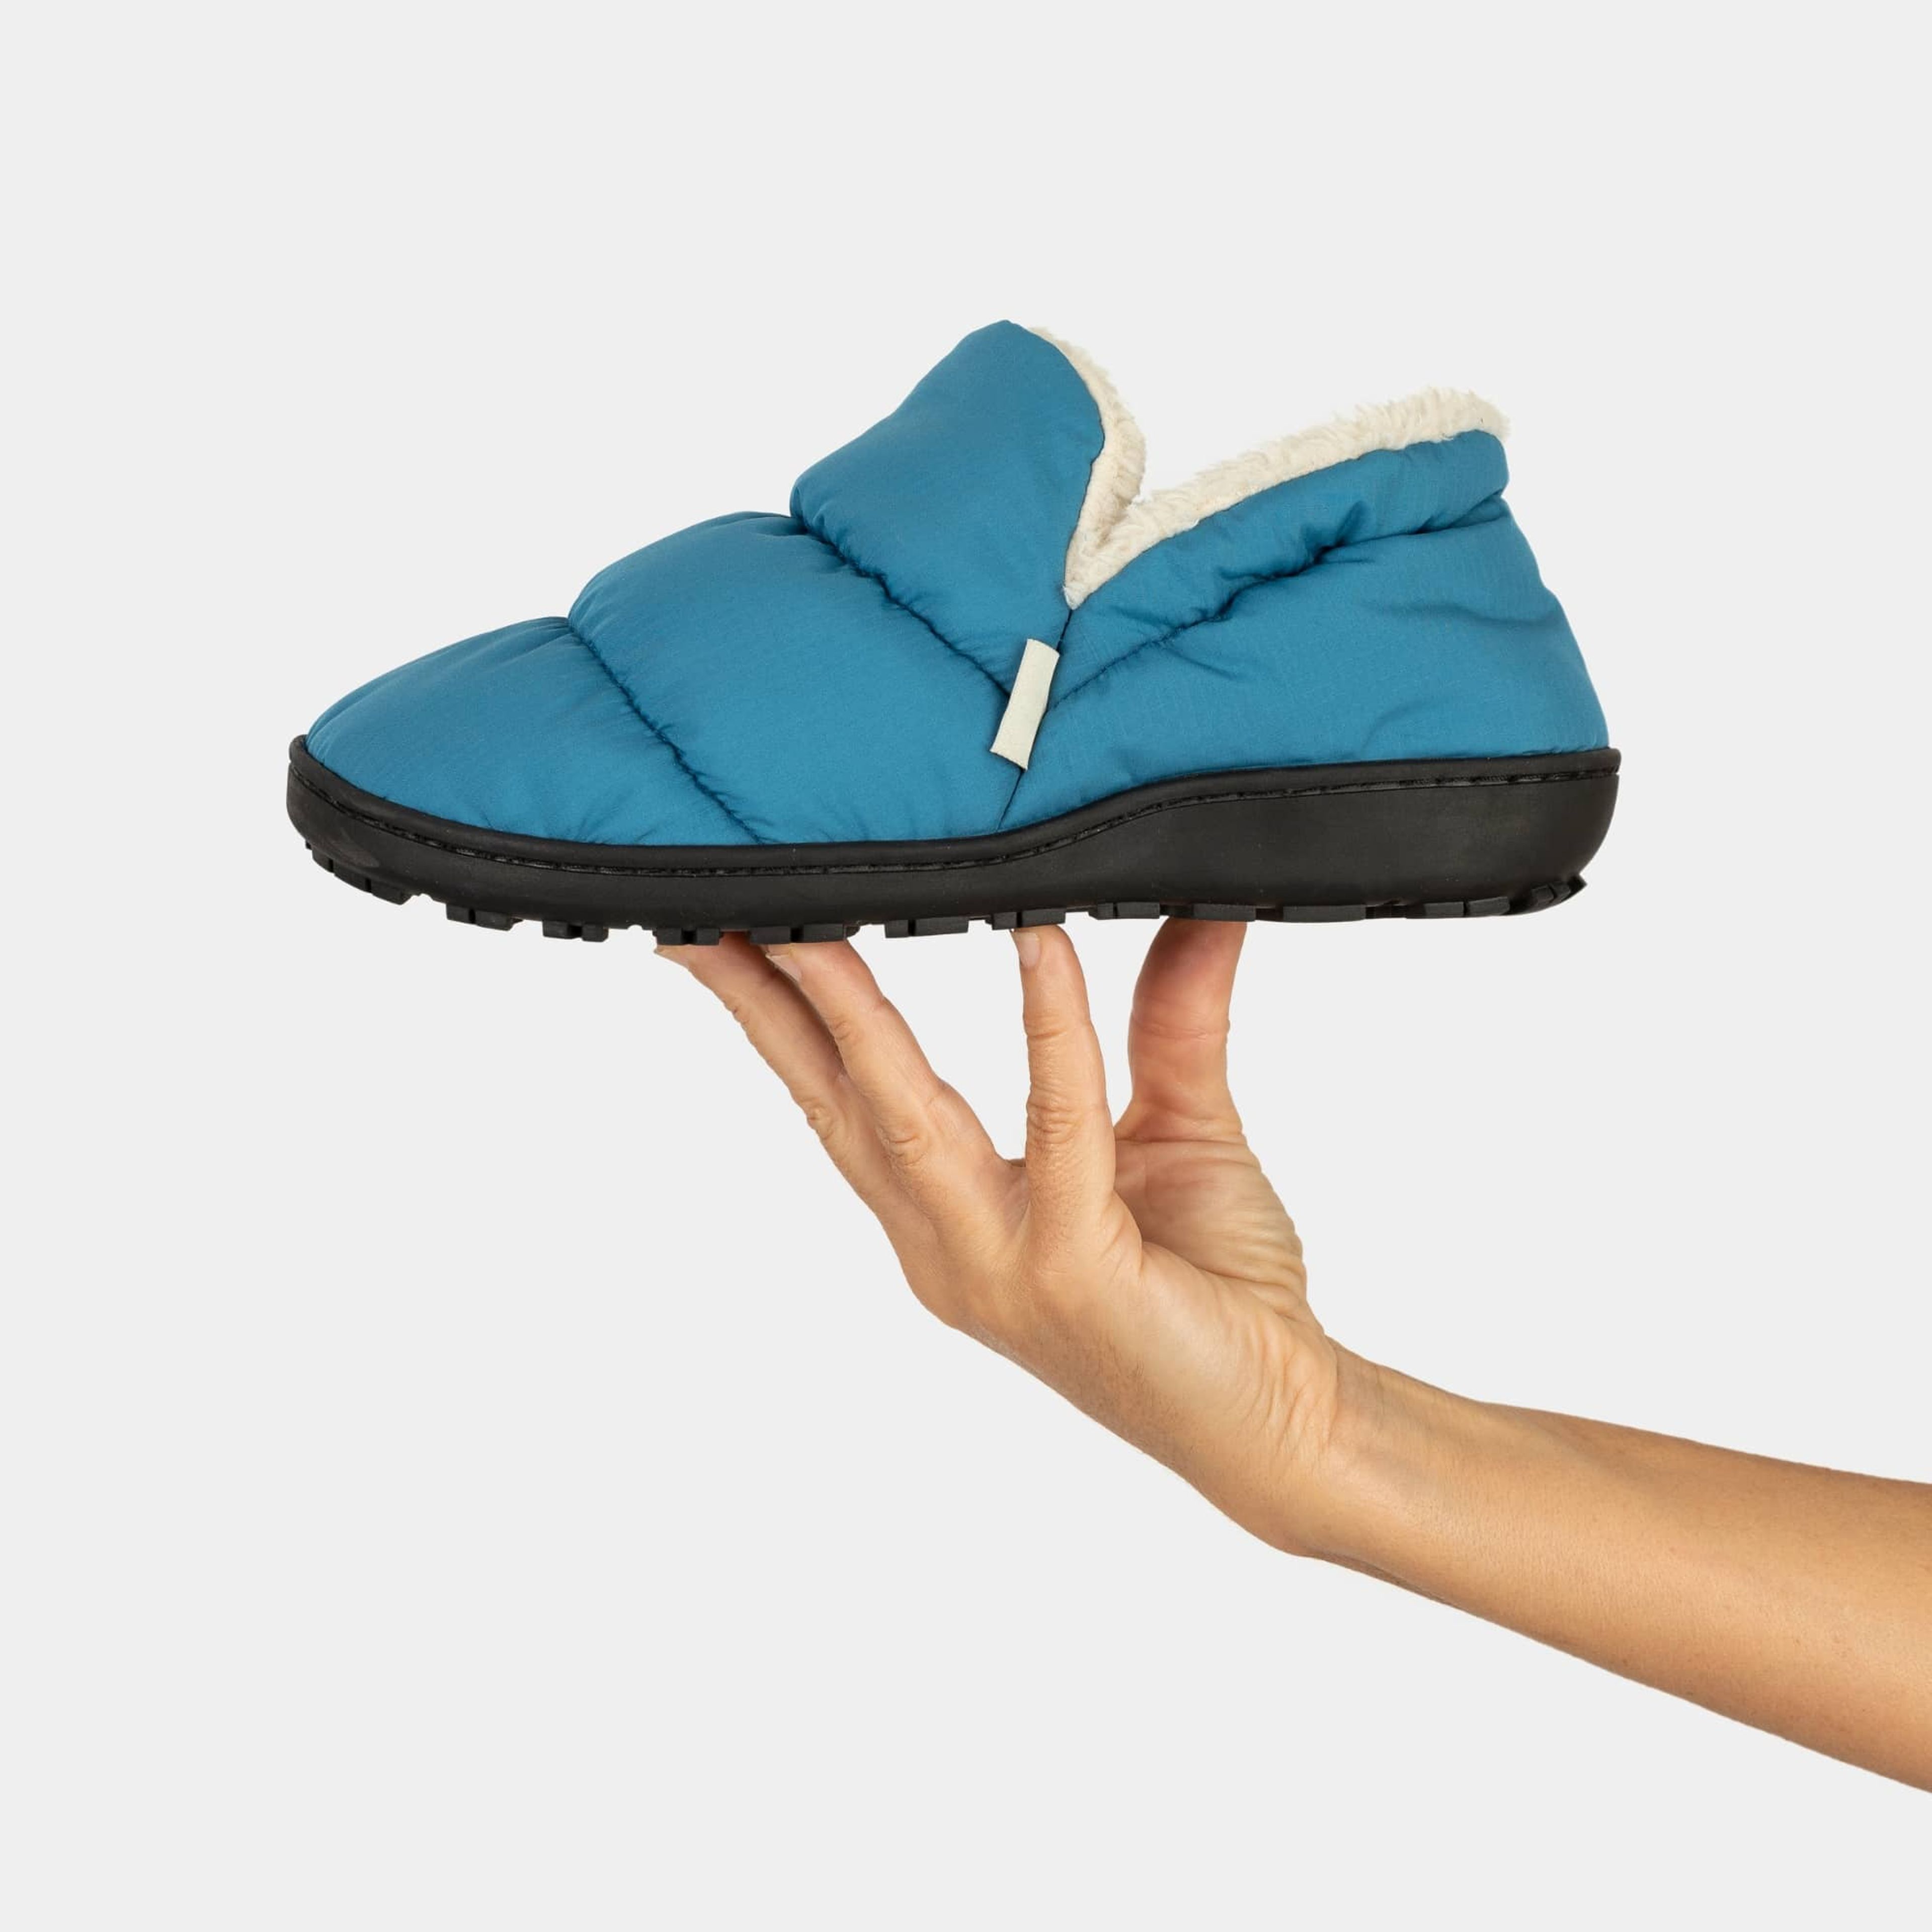 VOITED CloudTouch Slippers - Lightweight, Indoor/Outdoor Fleece-Lined Camping Slippers - Arctic Blue